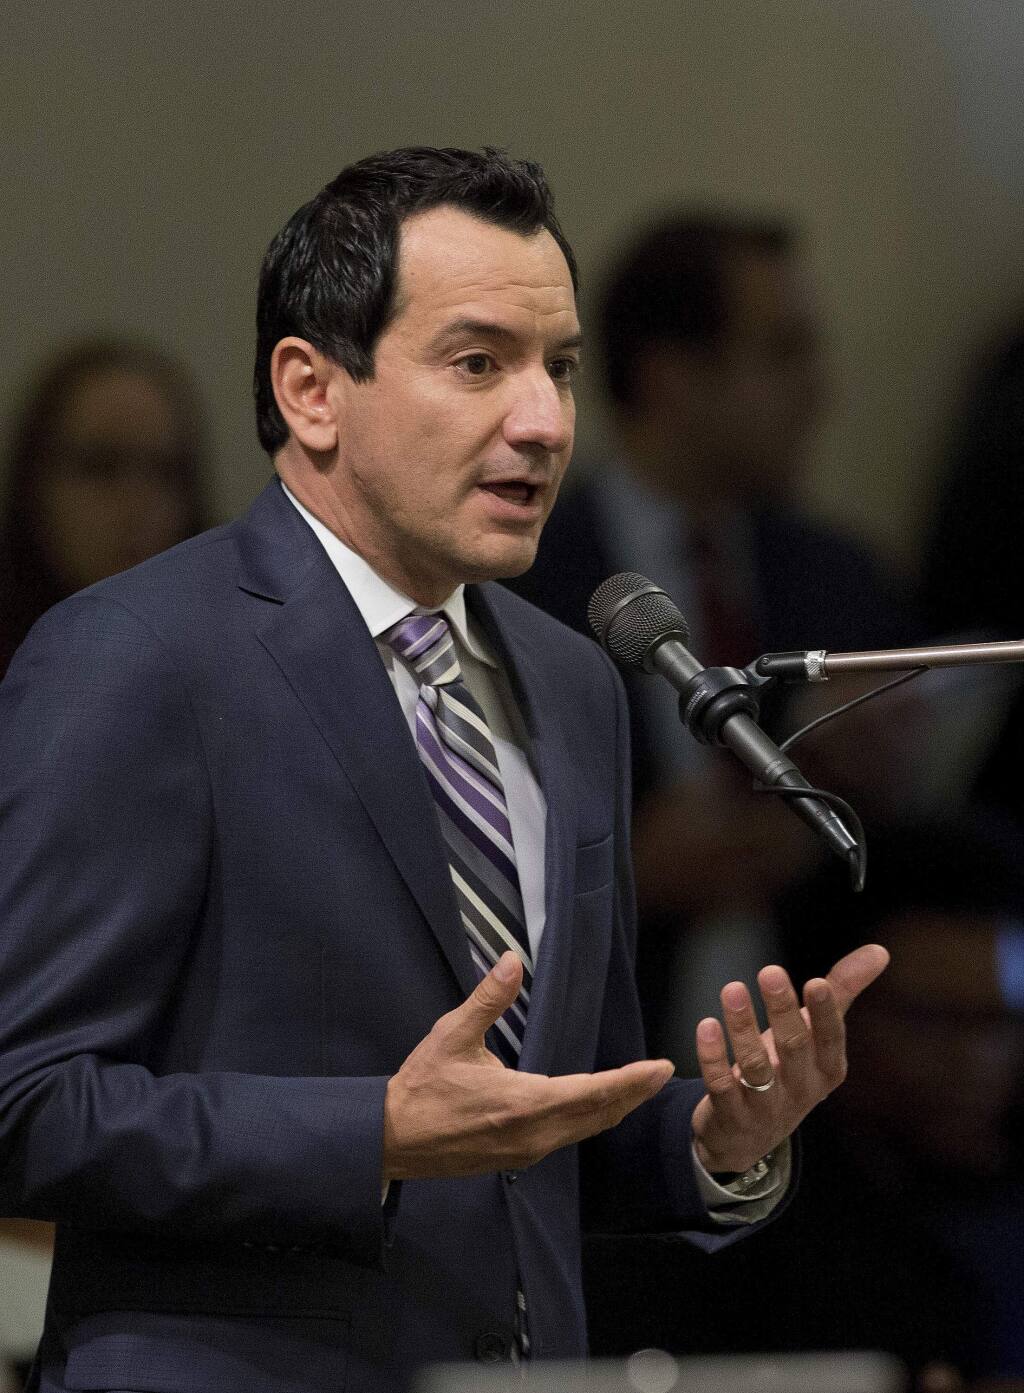 FILE - In this Aug. 24, 2016 file photo, Assembly Speaker Anthony Rendon, D-Paramount, addresses the the Assembly in Sacramento, Calif. A recall effort against Rendon, a strong progressive now targeted by party activists upset that he derailed a bill seeking government-funded health care for all. Rendon said he supports single-payer health care in concept, but SB562 was 'woefully incomplete.' The measure lacked key details about how a single-payer system would function, including a plan to raise the estimated $400 billion it would cost. (AP Photo/Rich Pedroncelli, File)